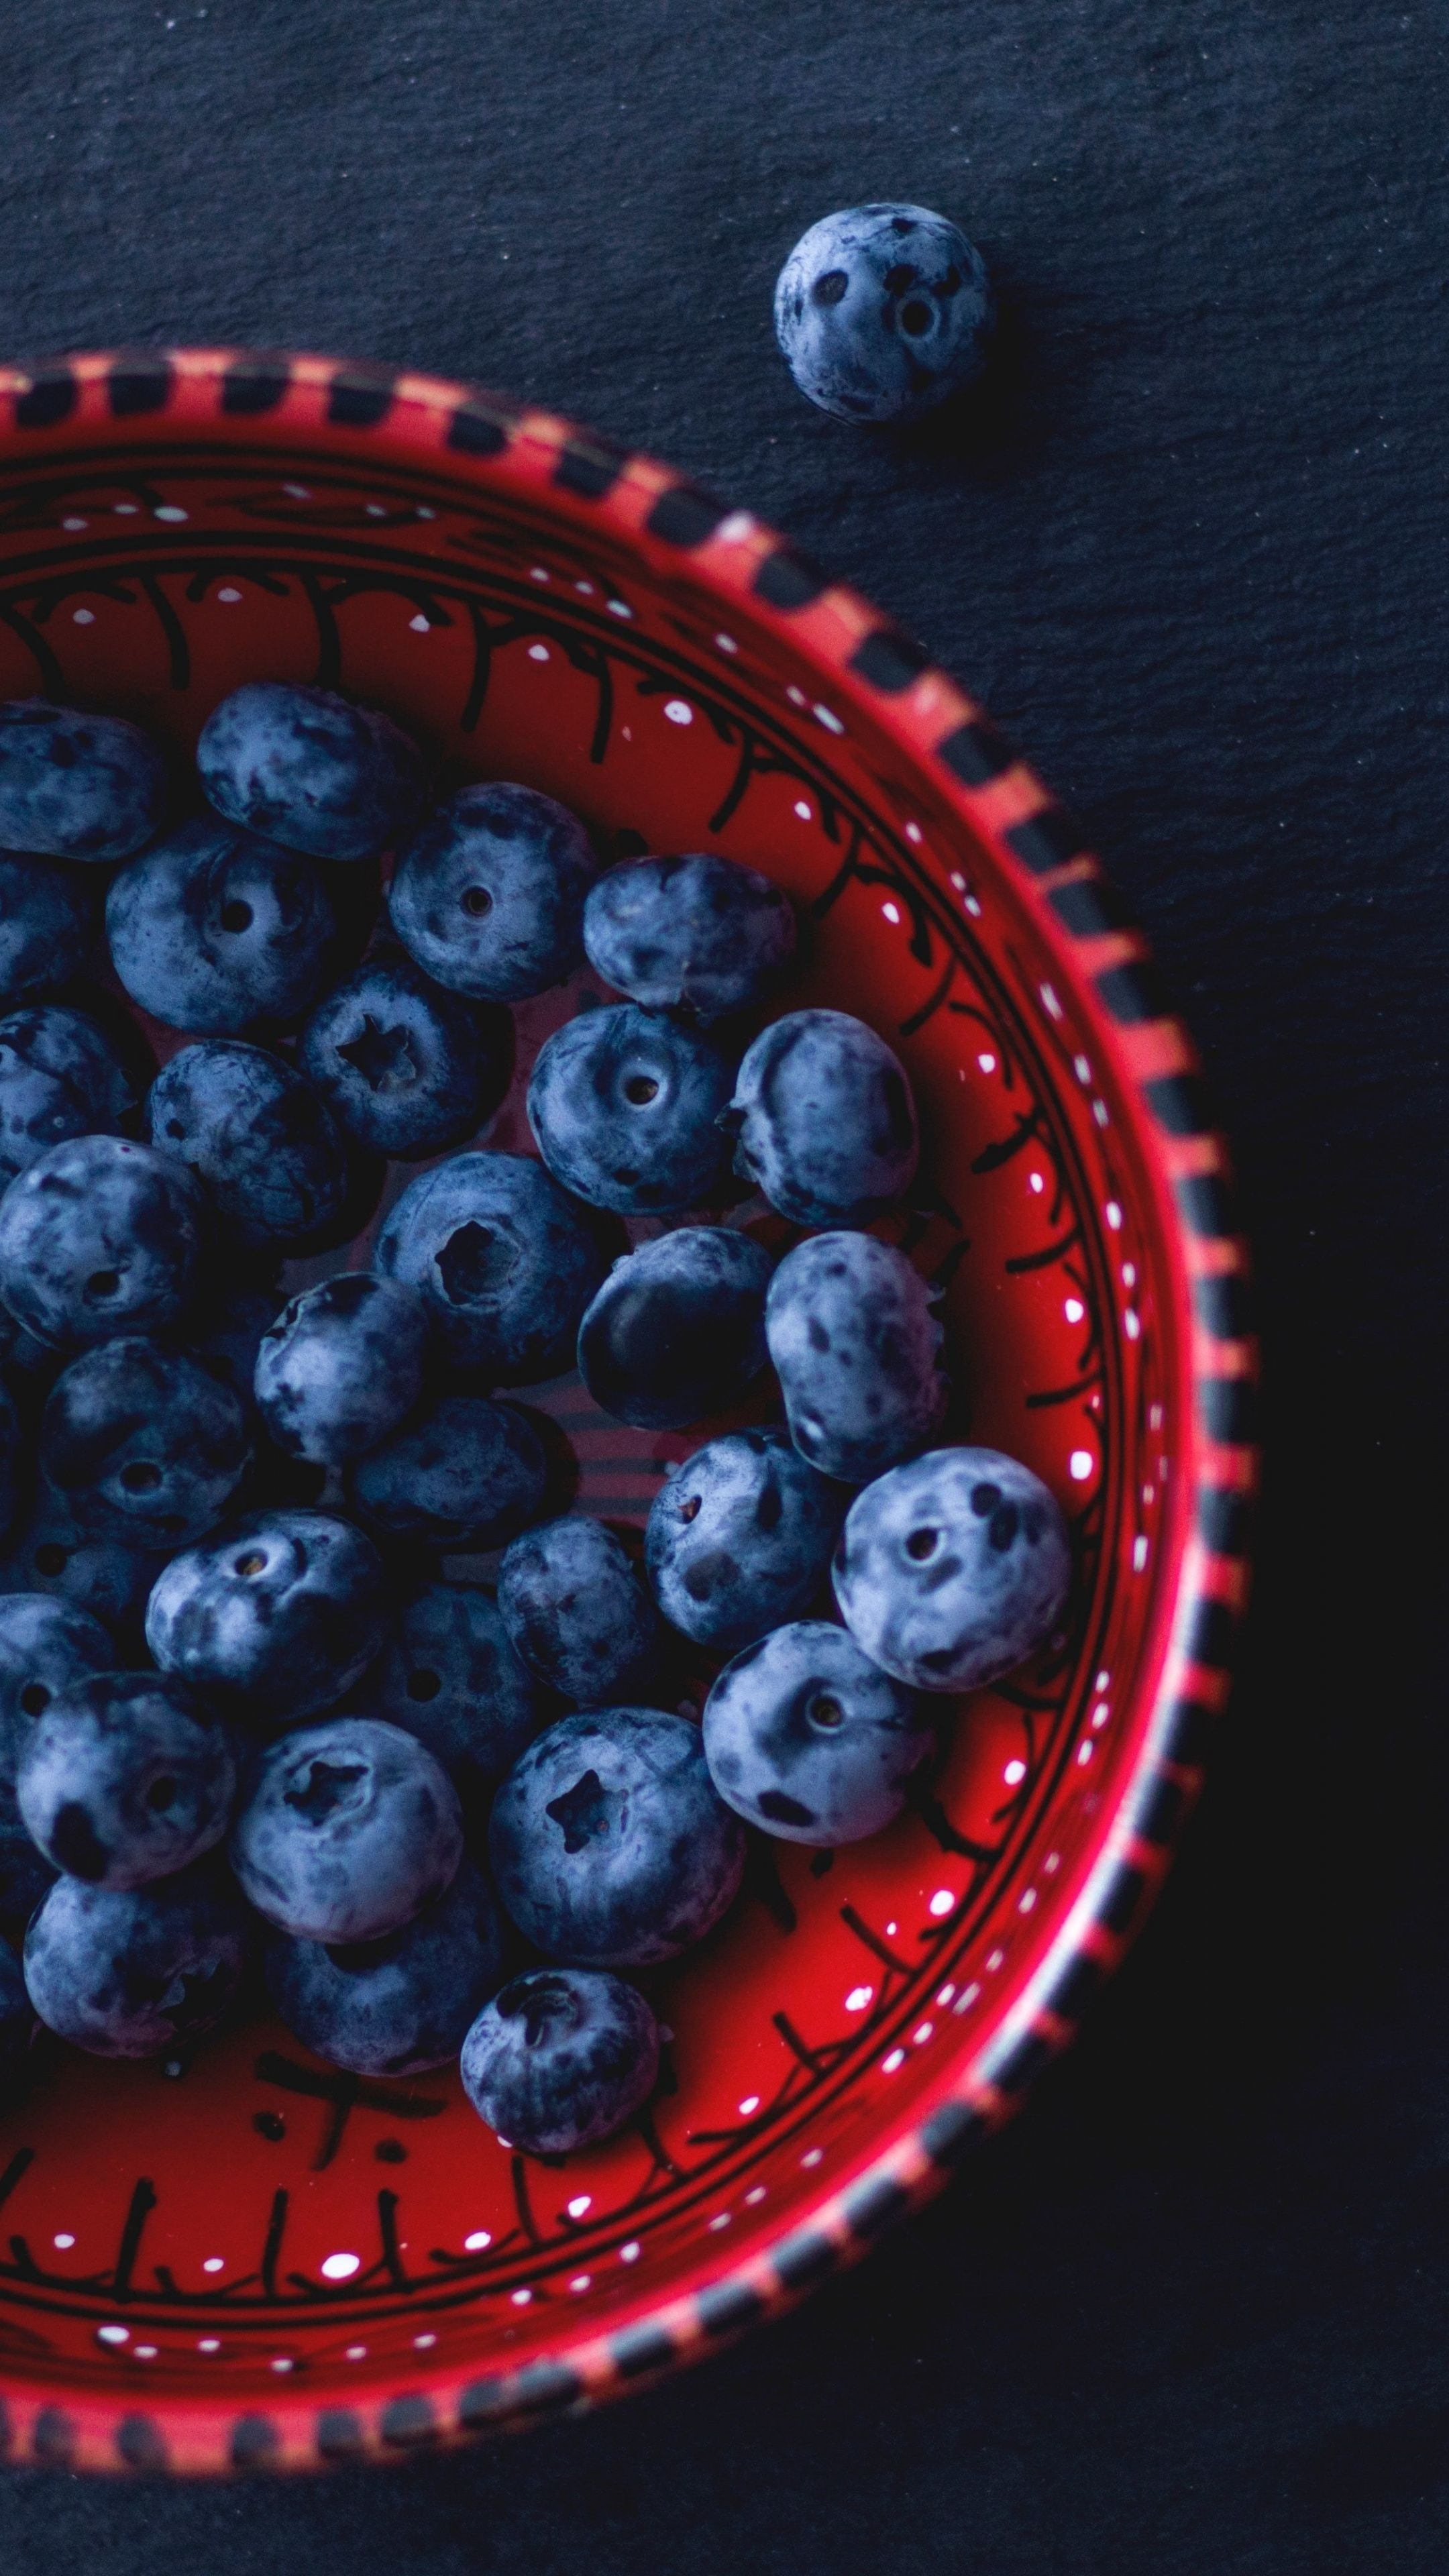 Blueberry bowl wallpaper, Sweet and sour combo, Tempting dessert, Mouth-watering image, 2160x3840 4K Handy